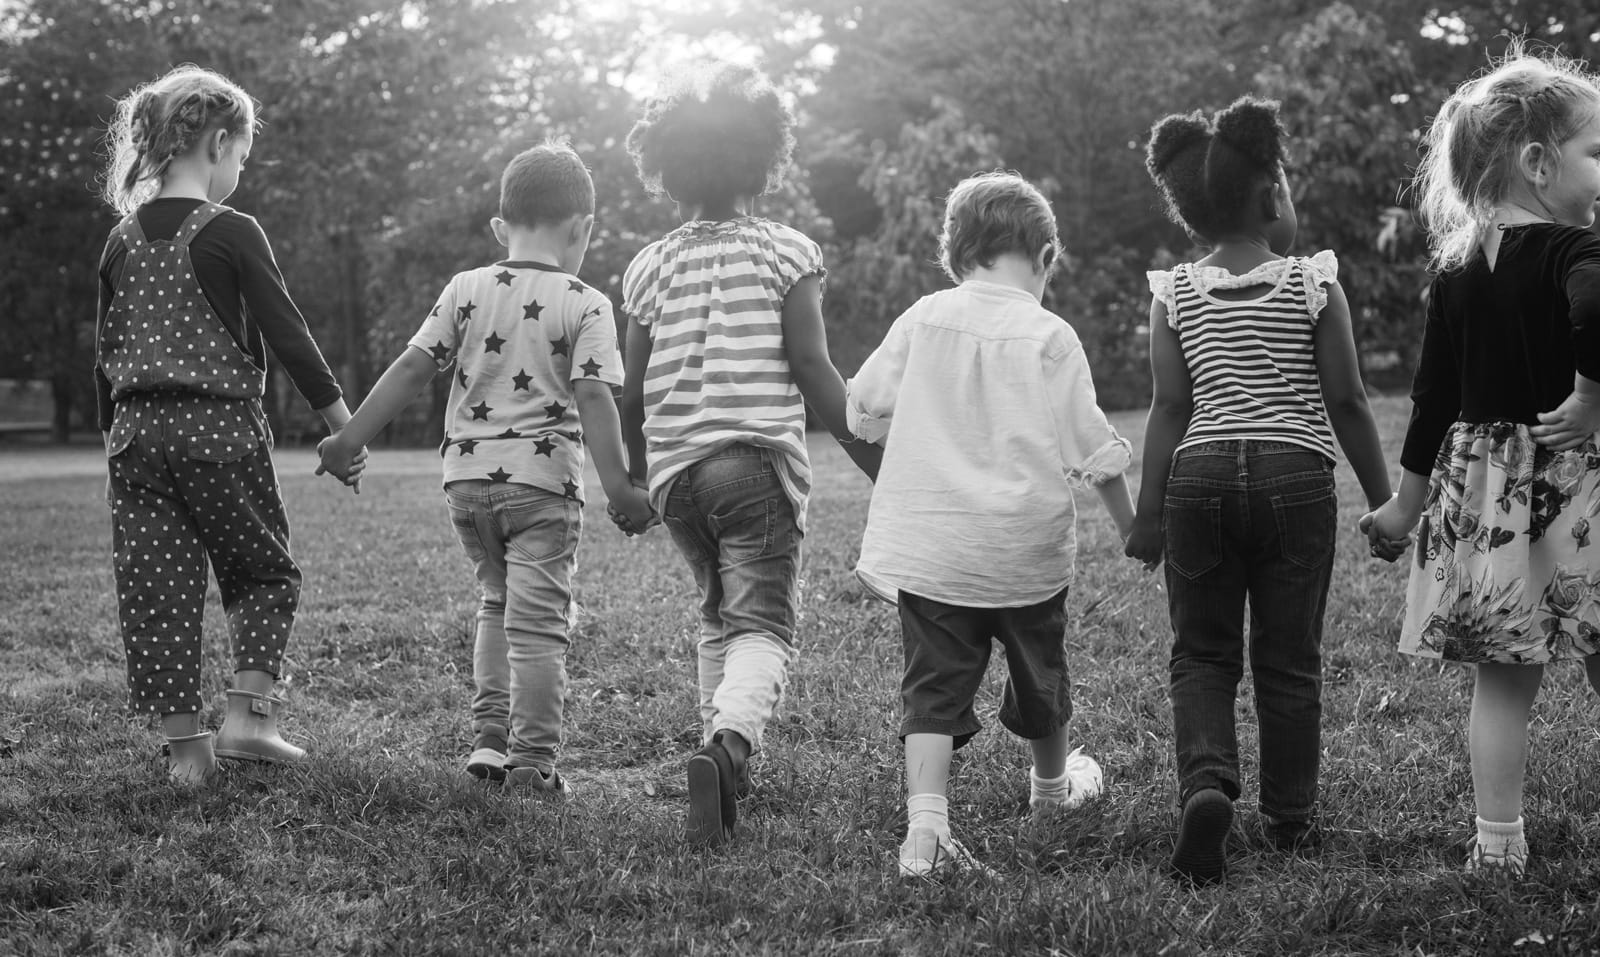 A group of children holding hands walking in the park